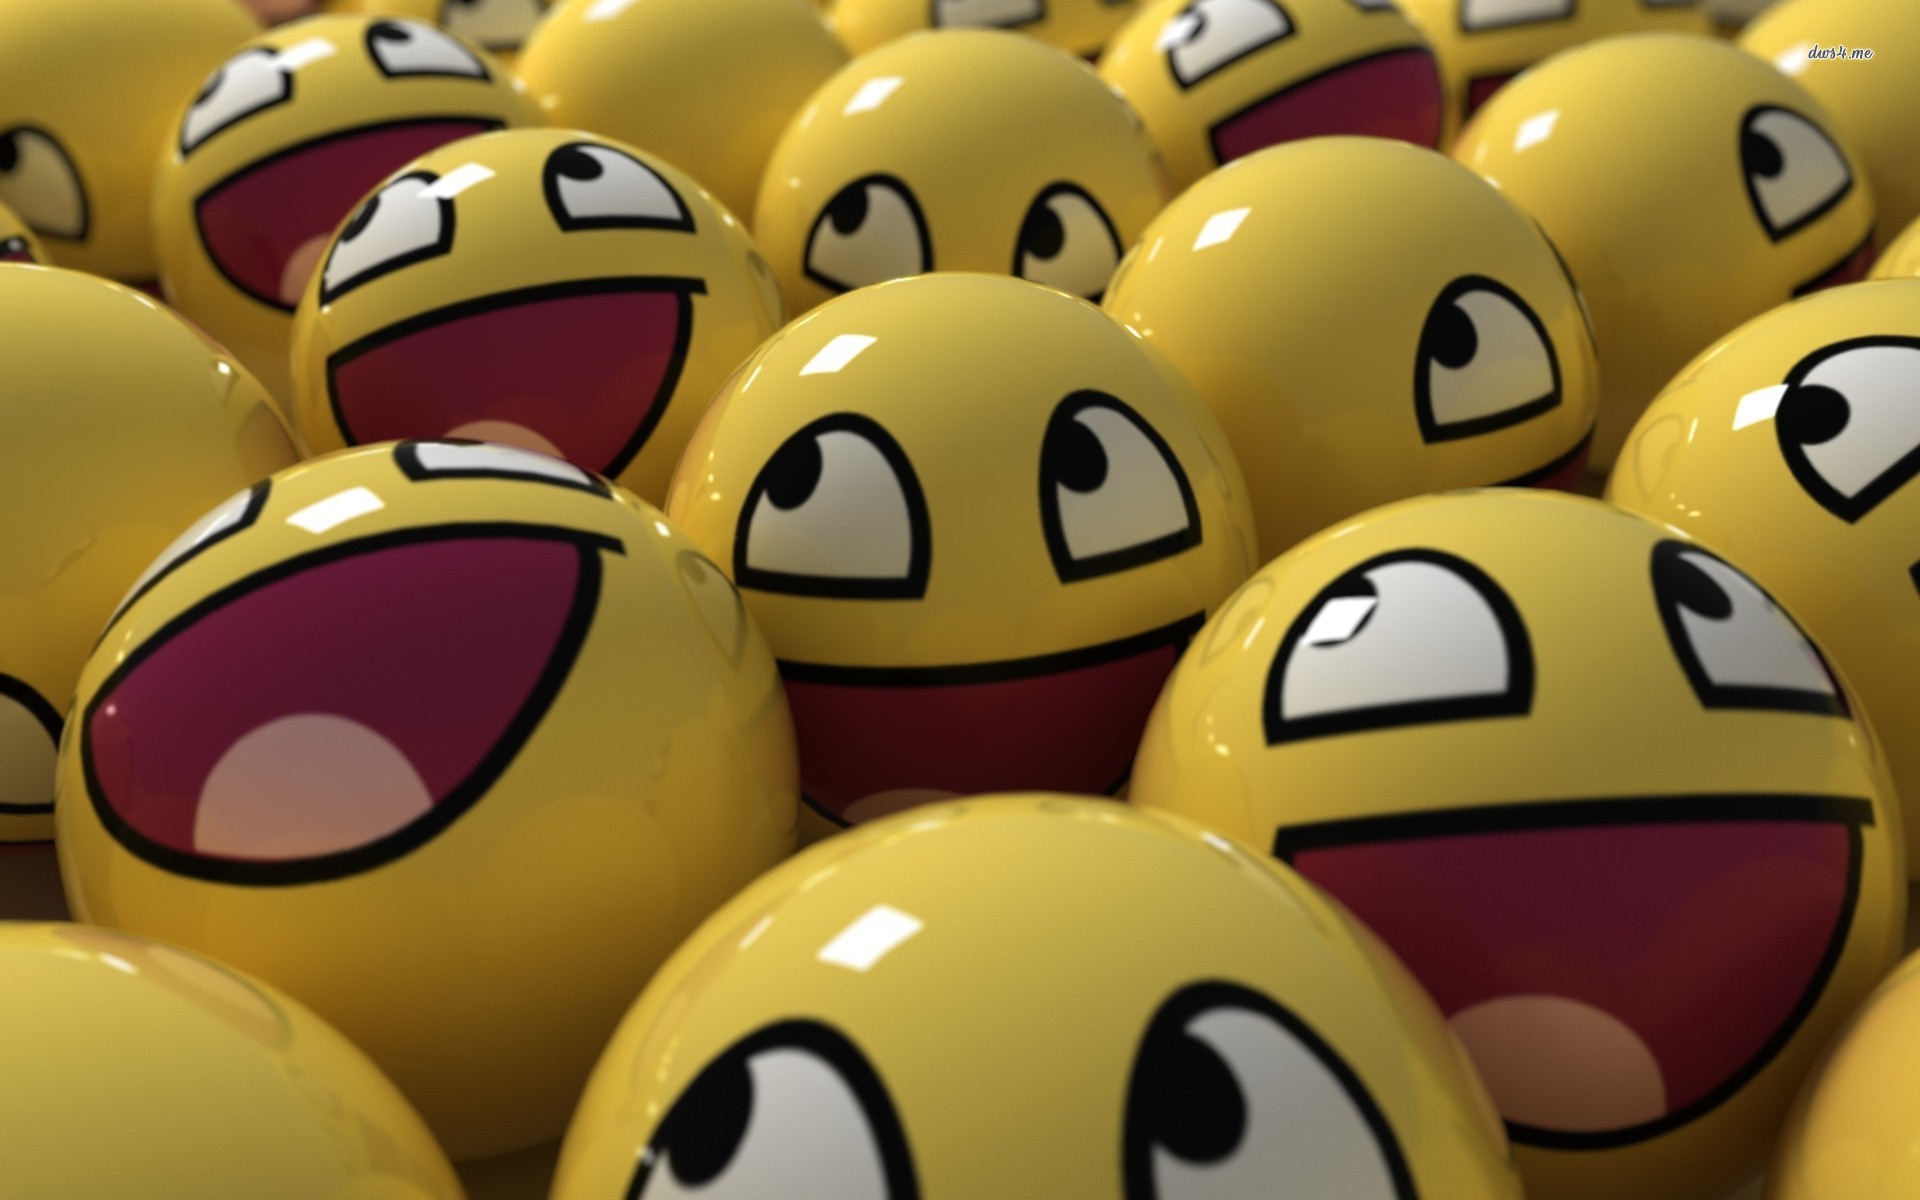 Quality Emoticon Wallpaper Full HD Is